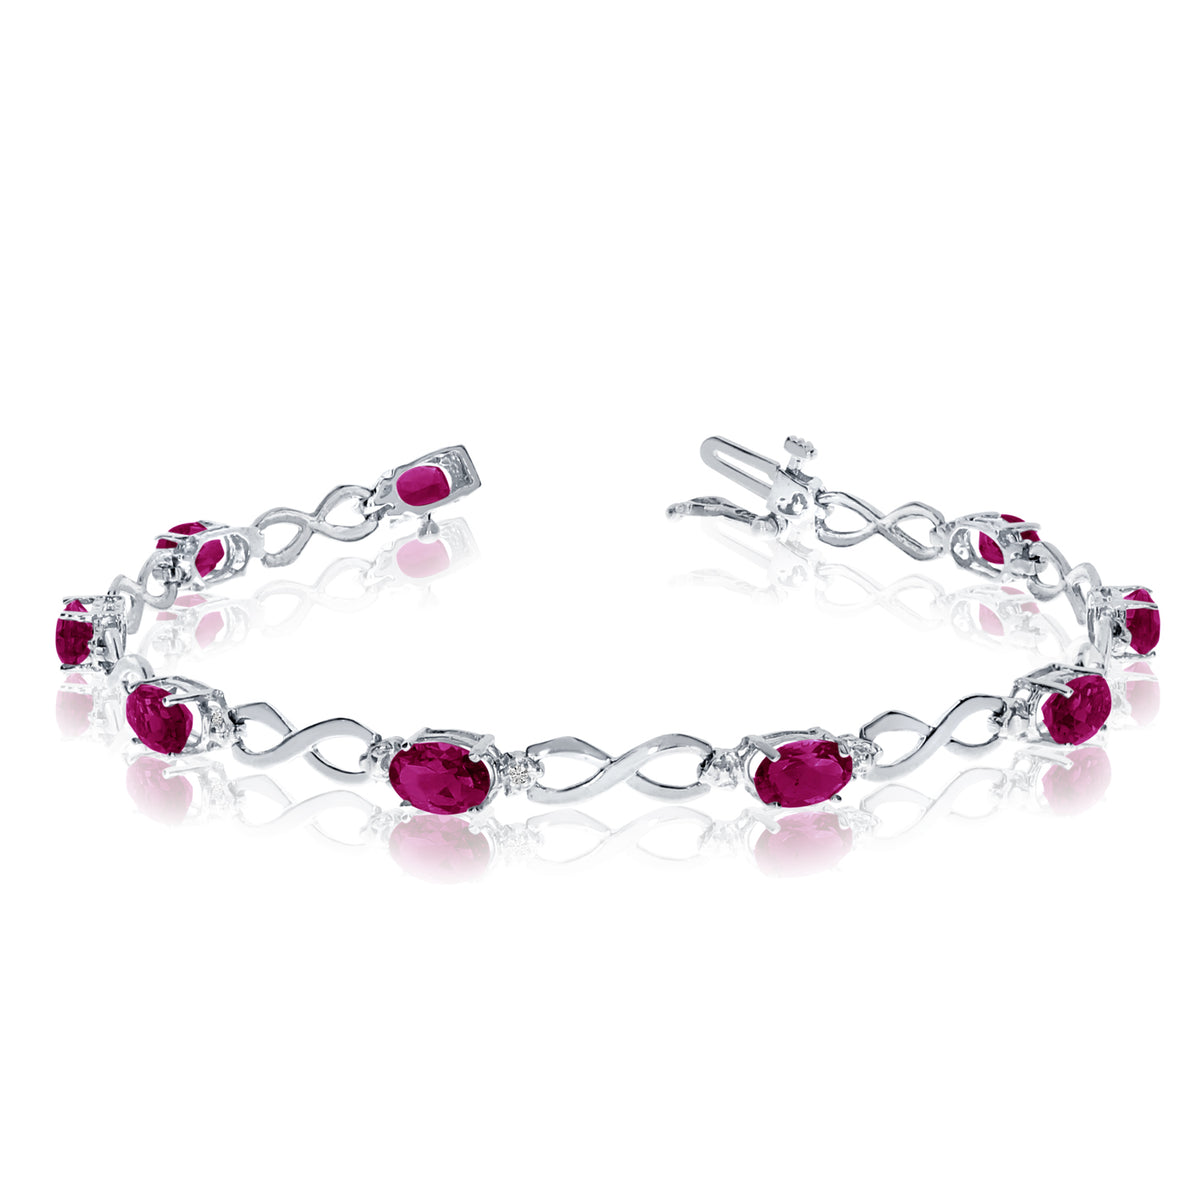 14K White Gold Oval Ruby Stones And Diamonds Infinity Tennis Bracelet, 7" fine designer jewelry for men and women